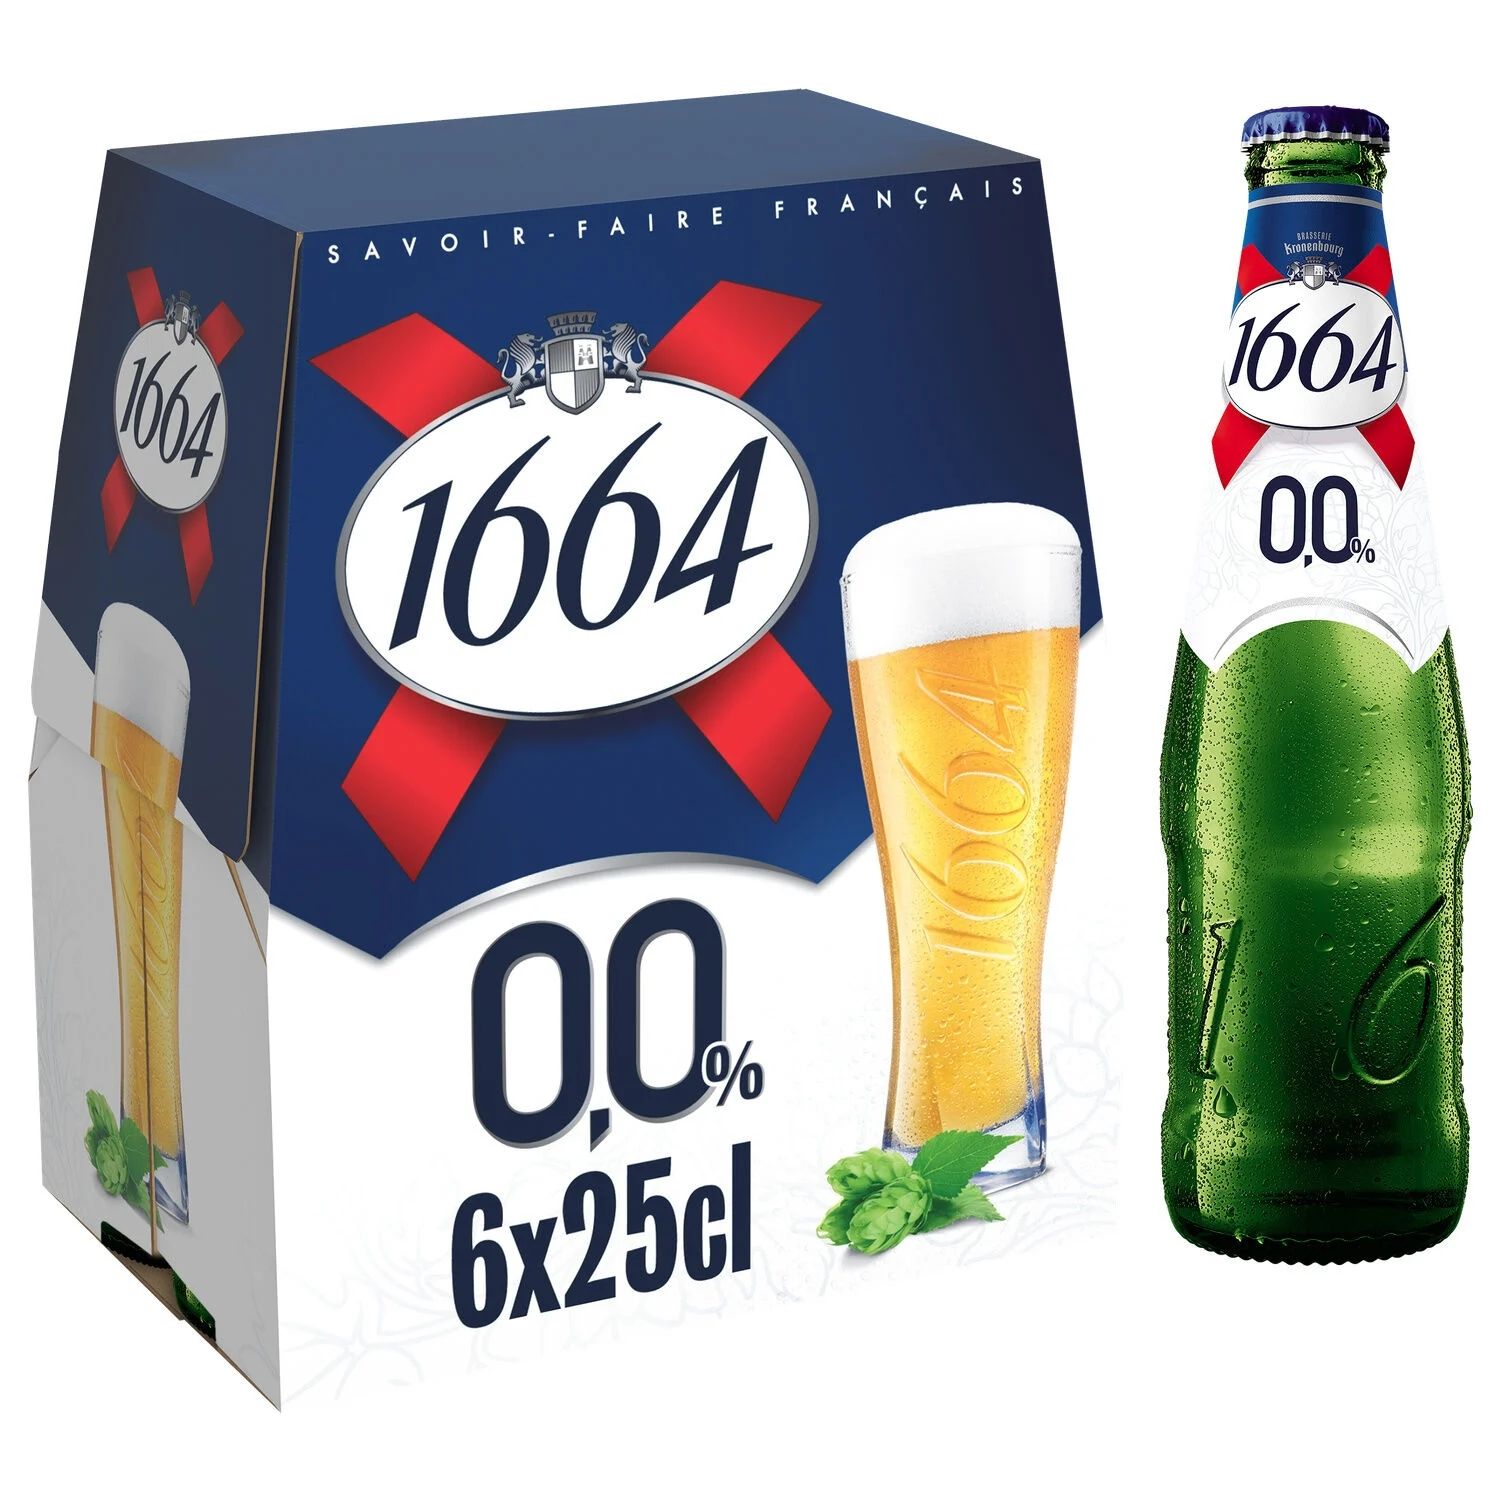 Alcohol-Free Blonde Beer, 6x25cl - 1664